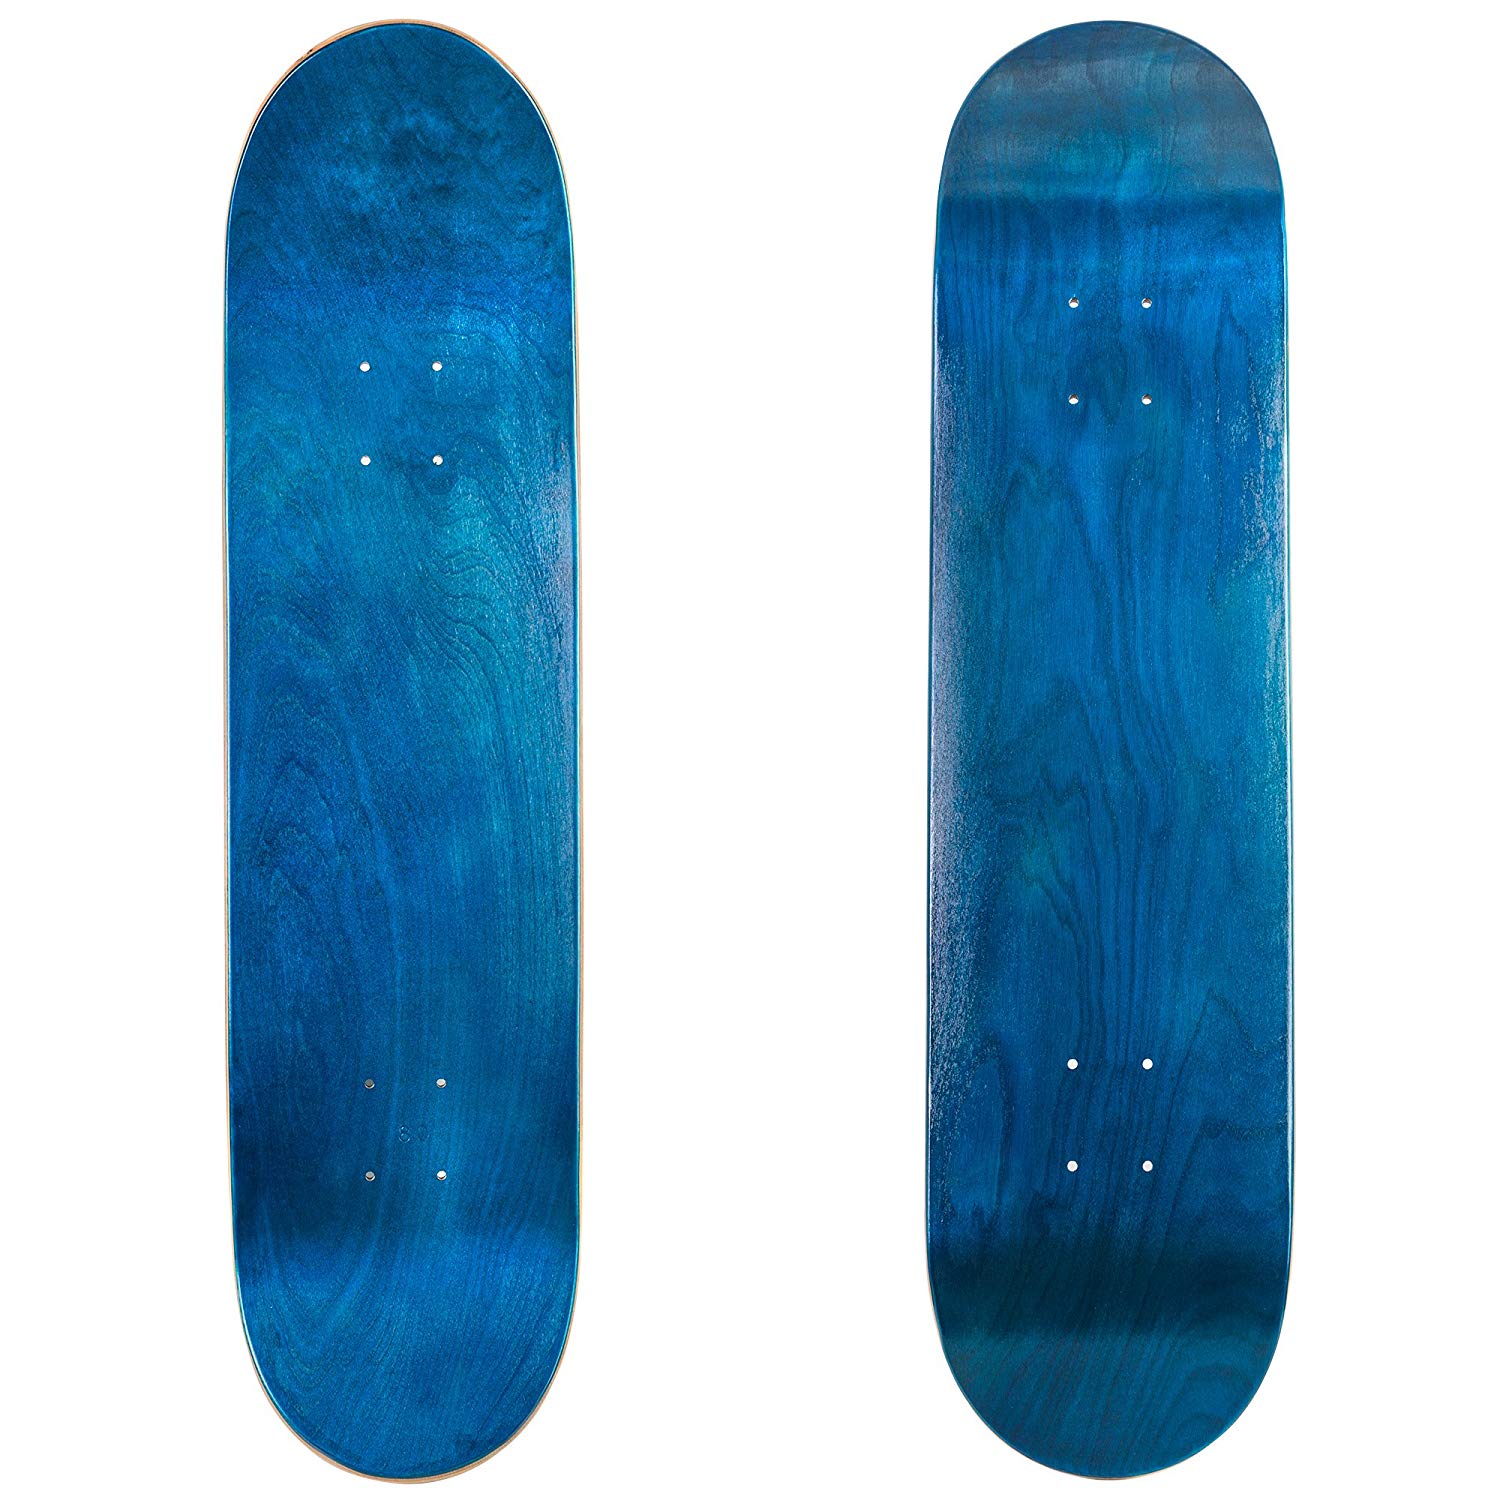 Cal 7 Blank Maple Skateboard Deck with Color Grip Tape | 8.5 Inch | Two Pack (Blue) - image 2 of 3